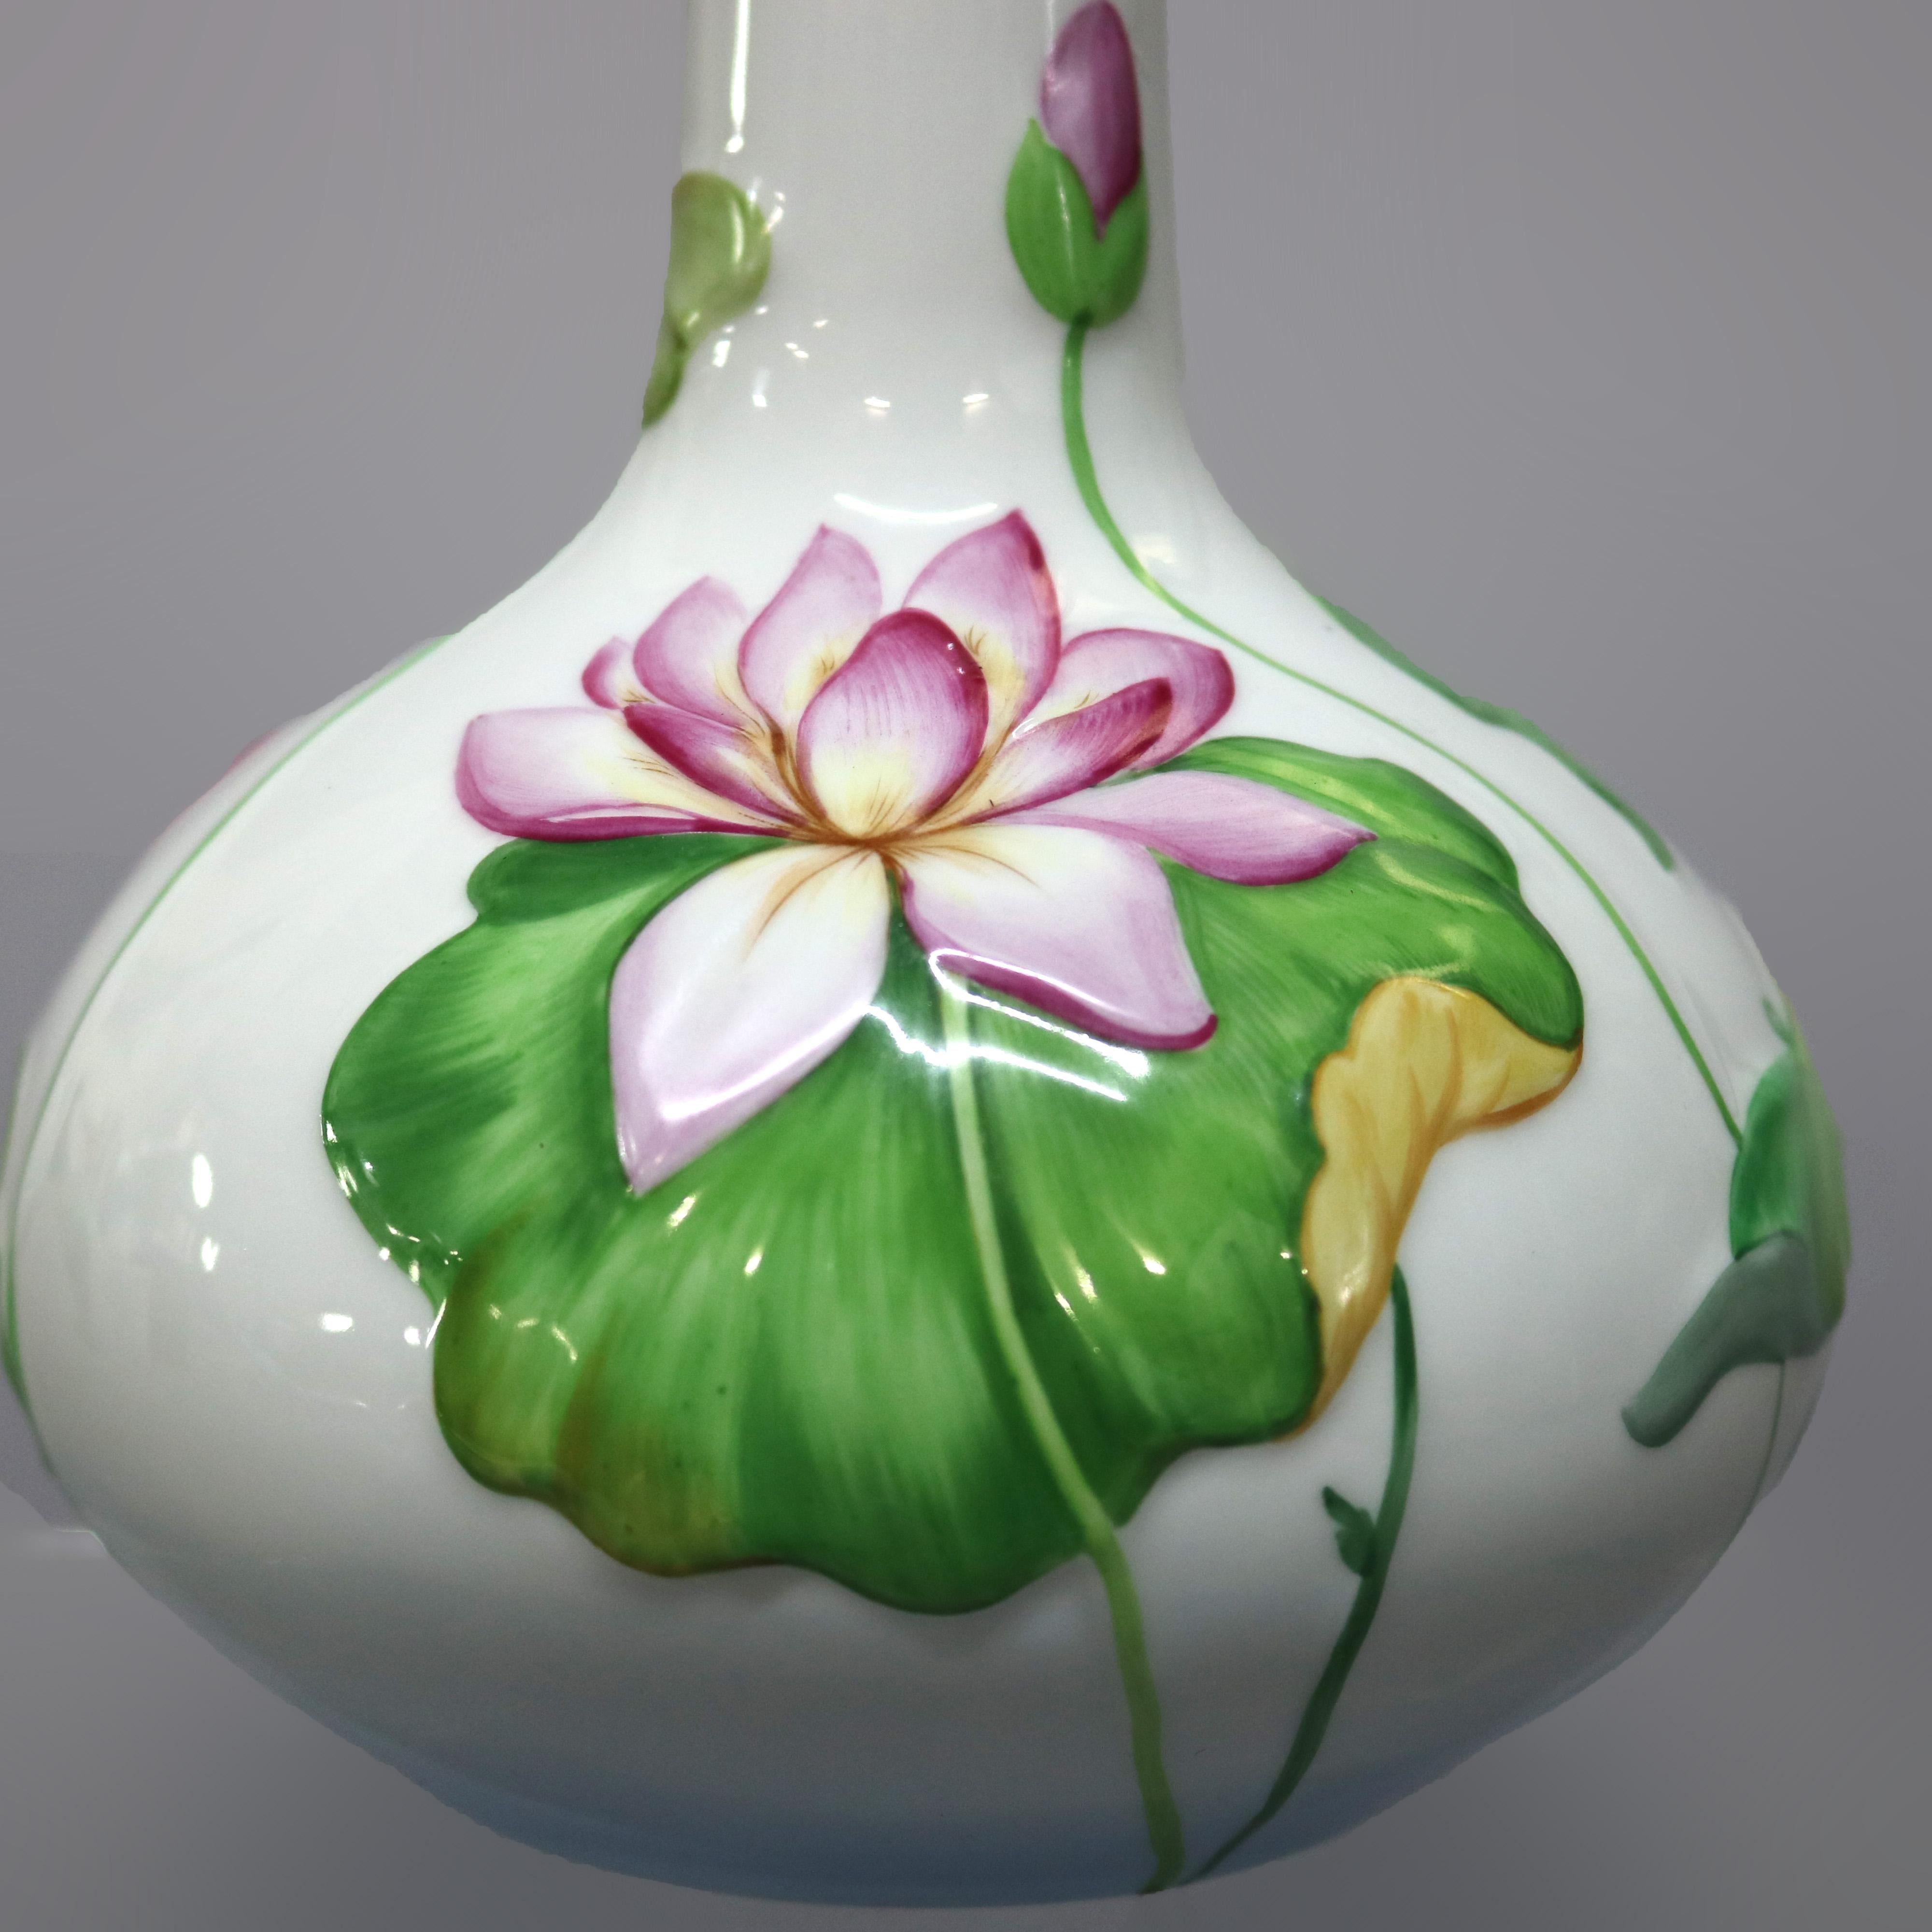 Hungarian Herend Hungary Porcelain Hand Painted Lily Pad and Butterfly Vase, 20th Century